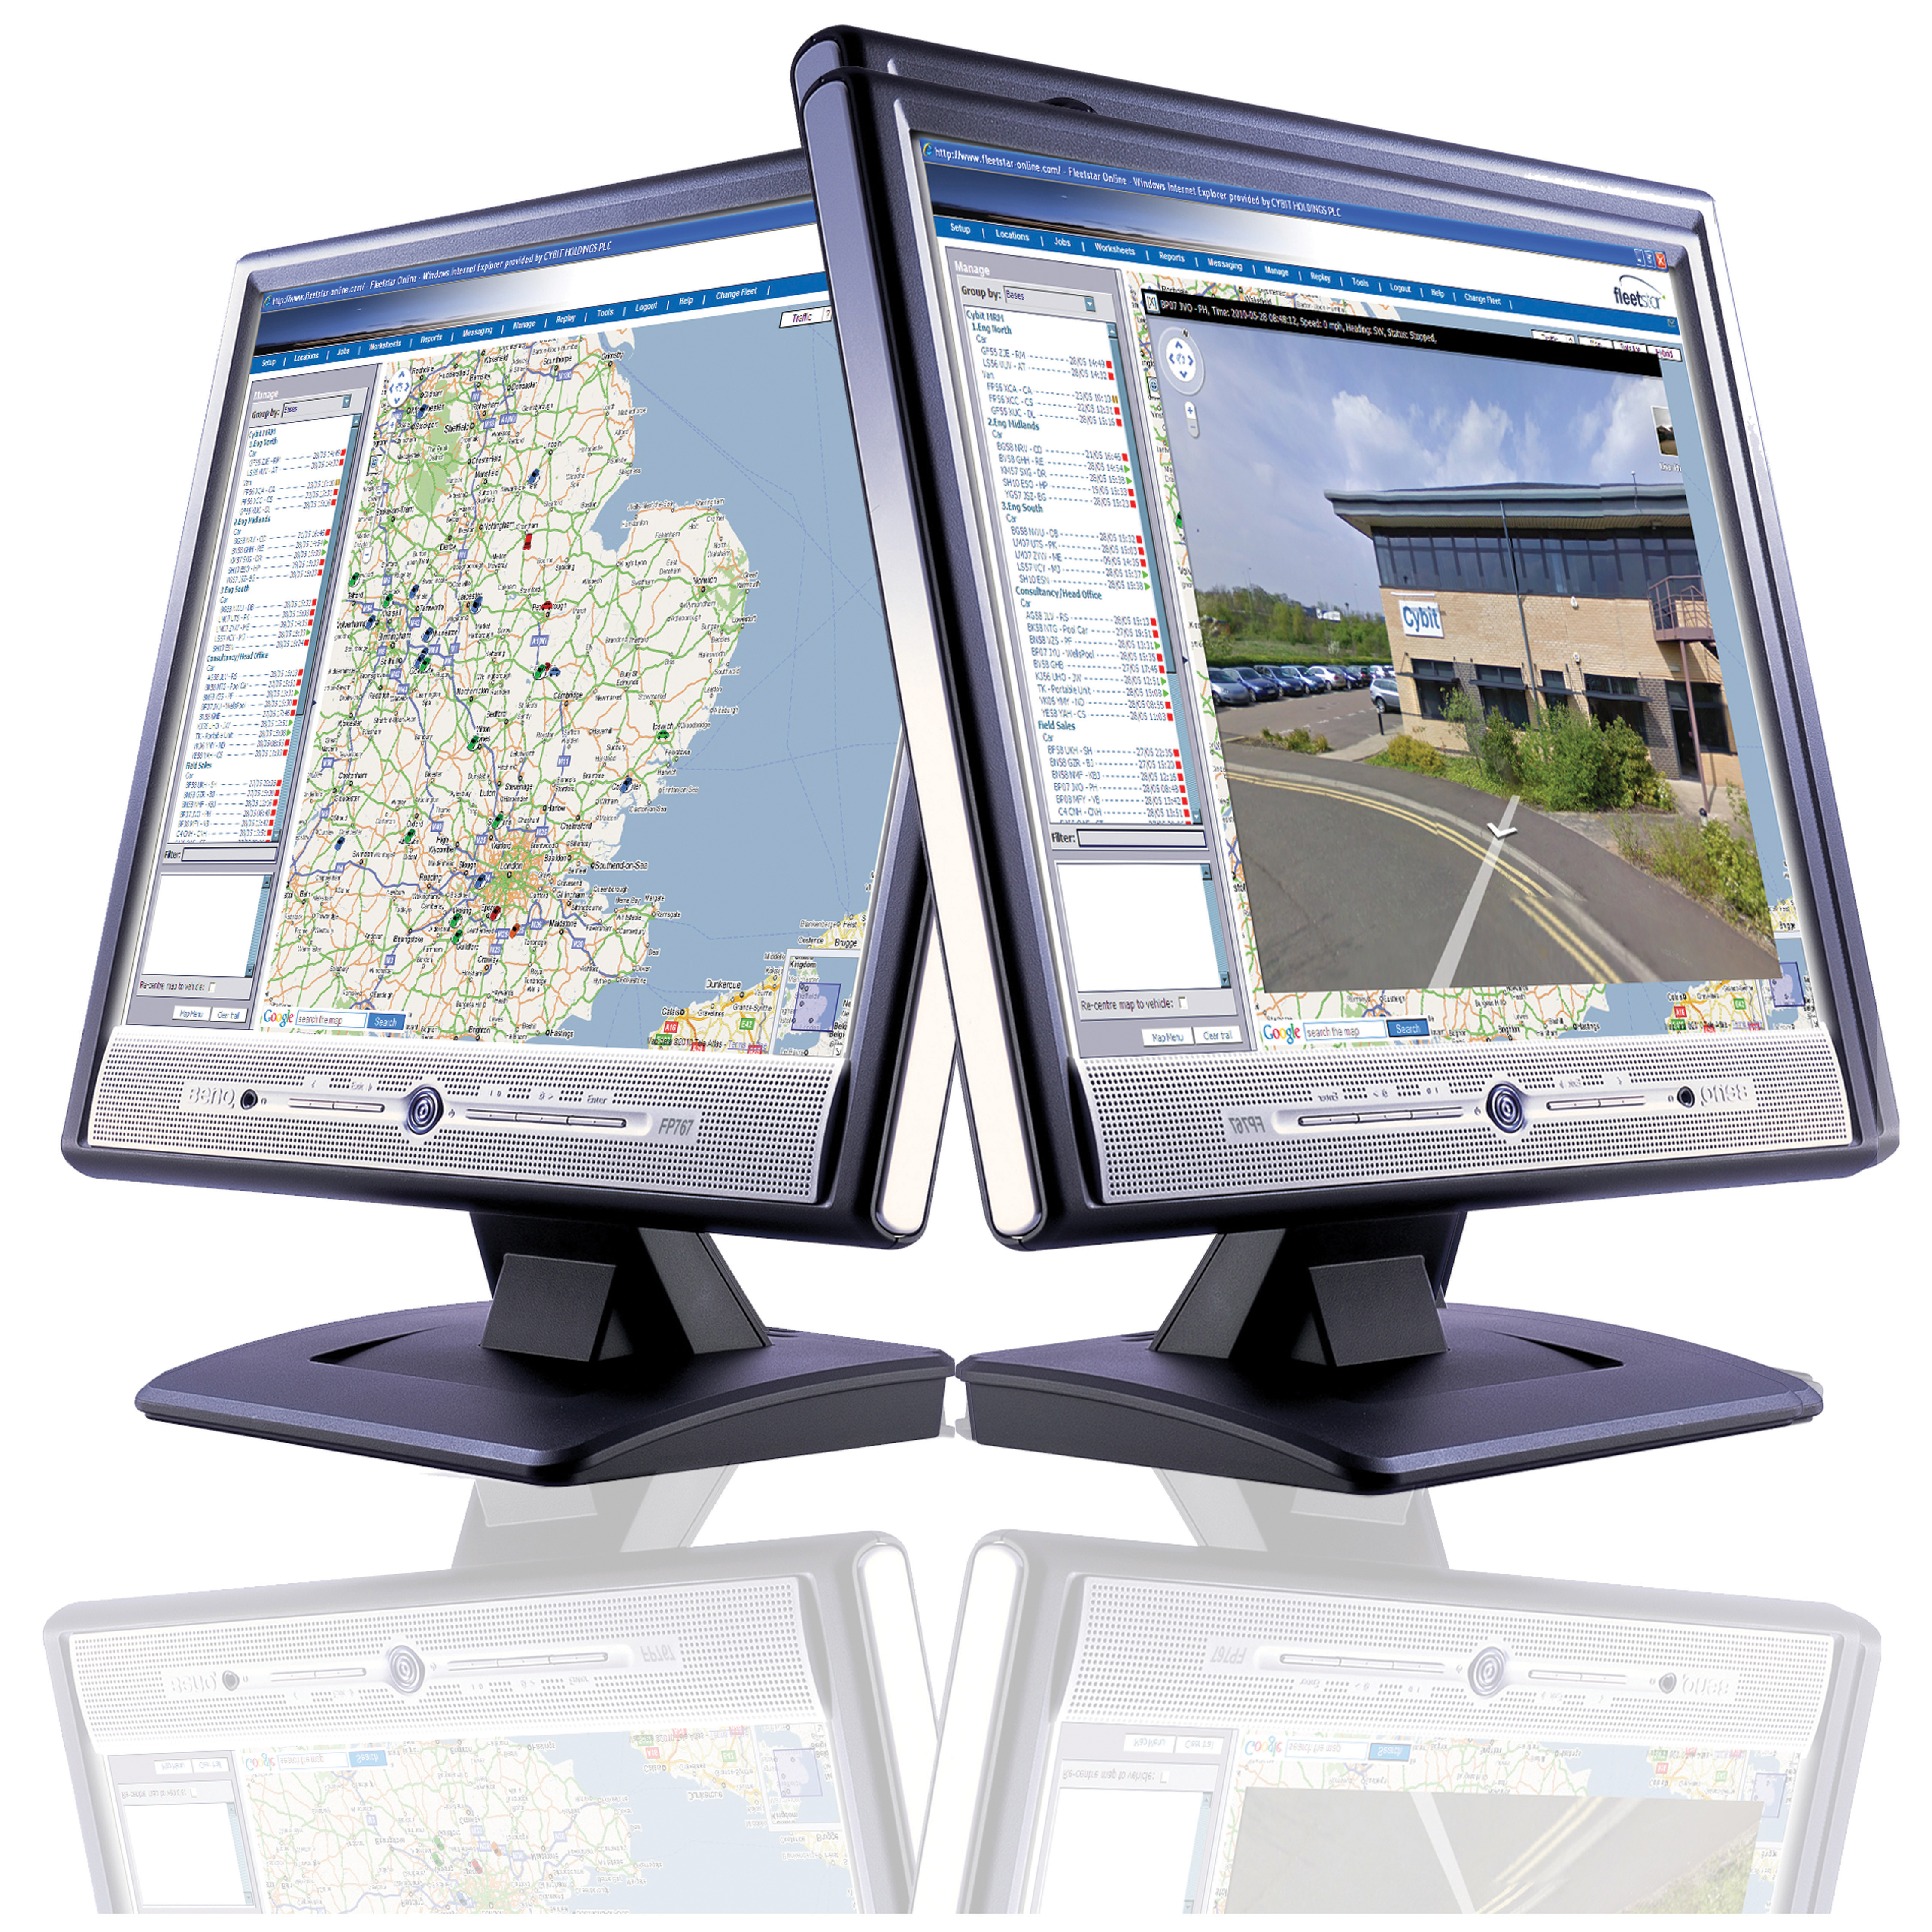 Cybit launches new suite of mapping tools